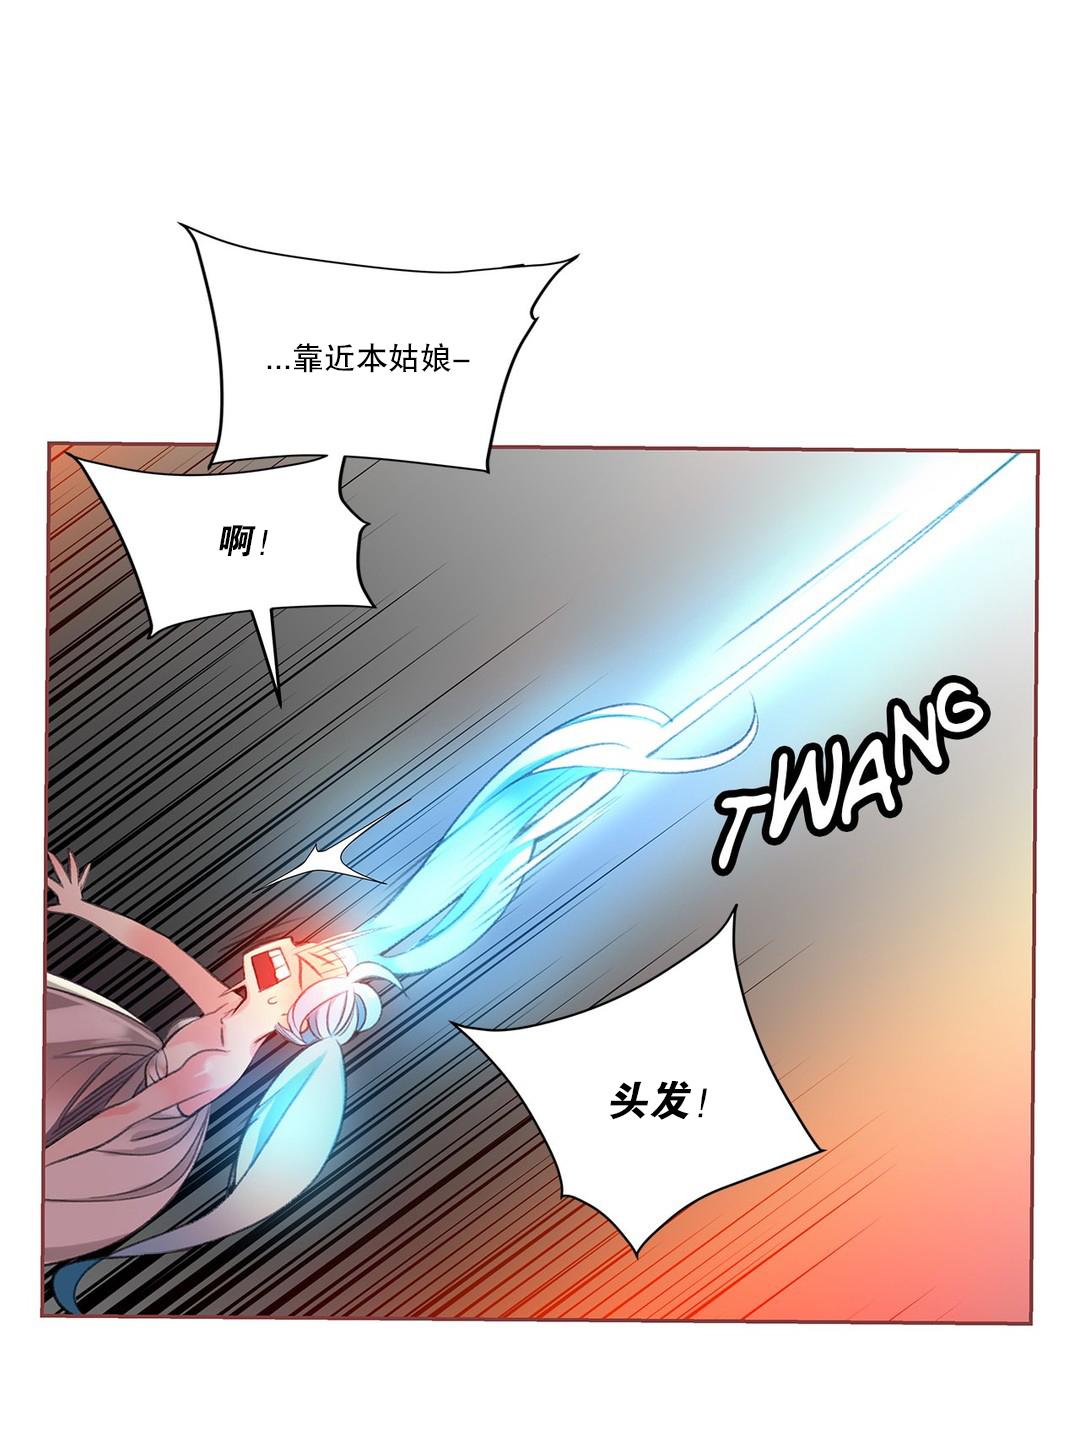 [Juder] Lilith`s Cord (第二季) Ch.61-63 [Chinese] [aaatwist个人汉化] [Ongoing] 9